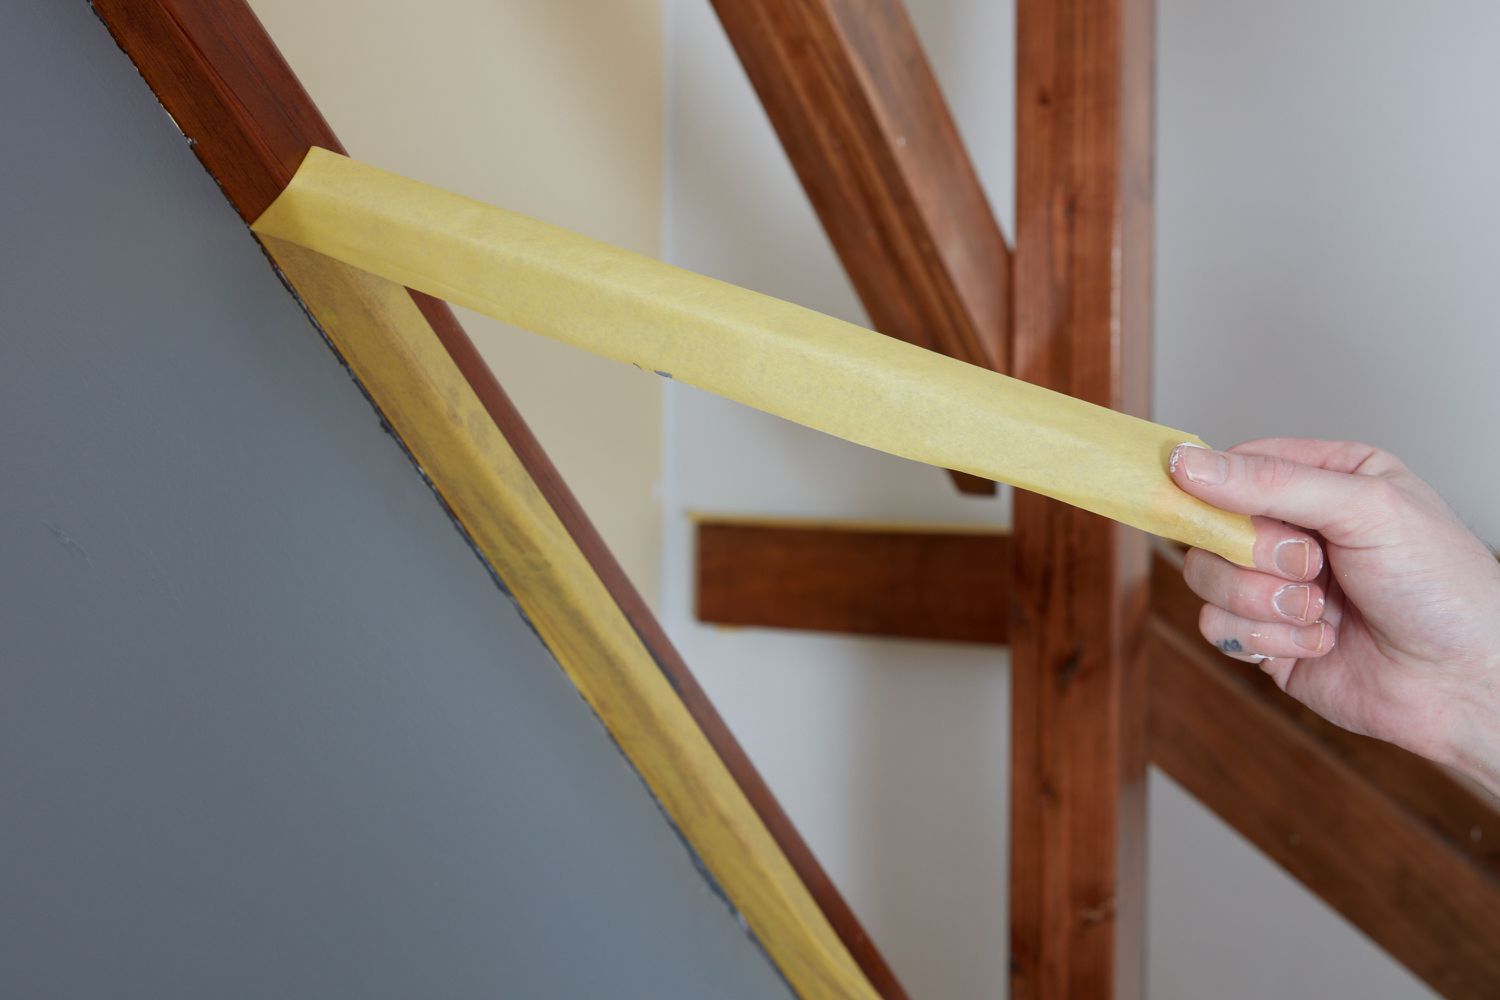 Painter's tape removed from wood trim after painting